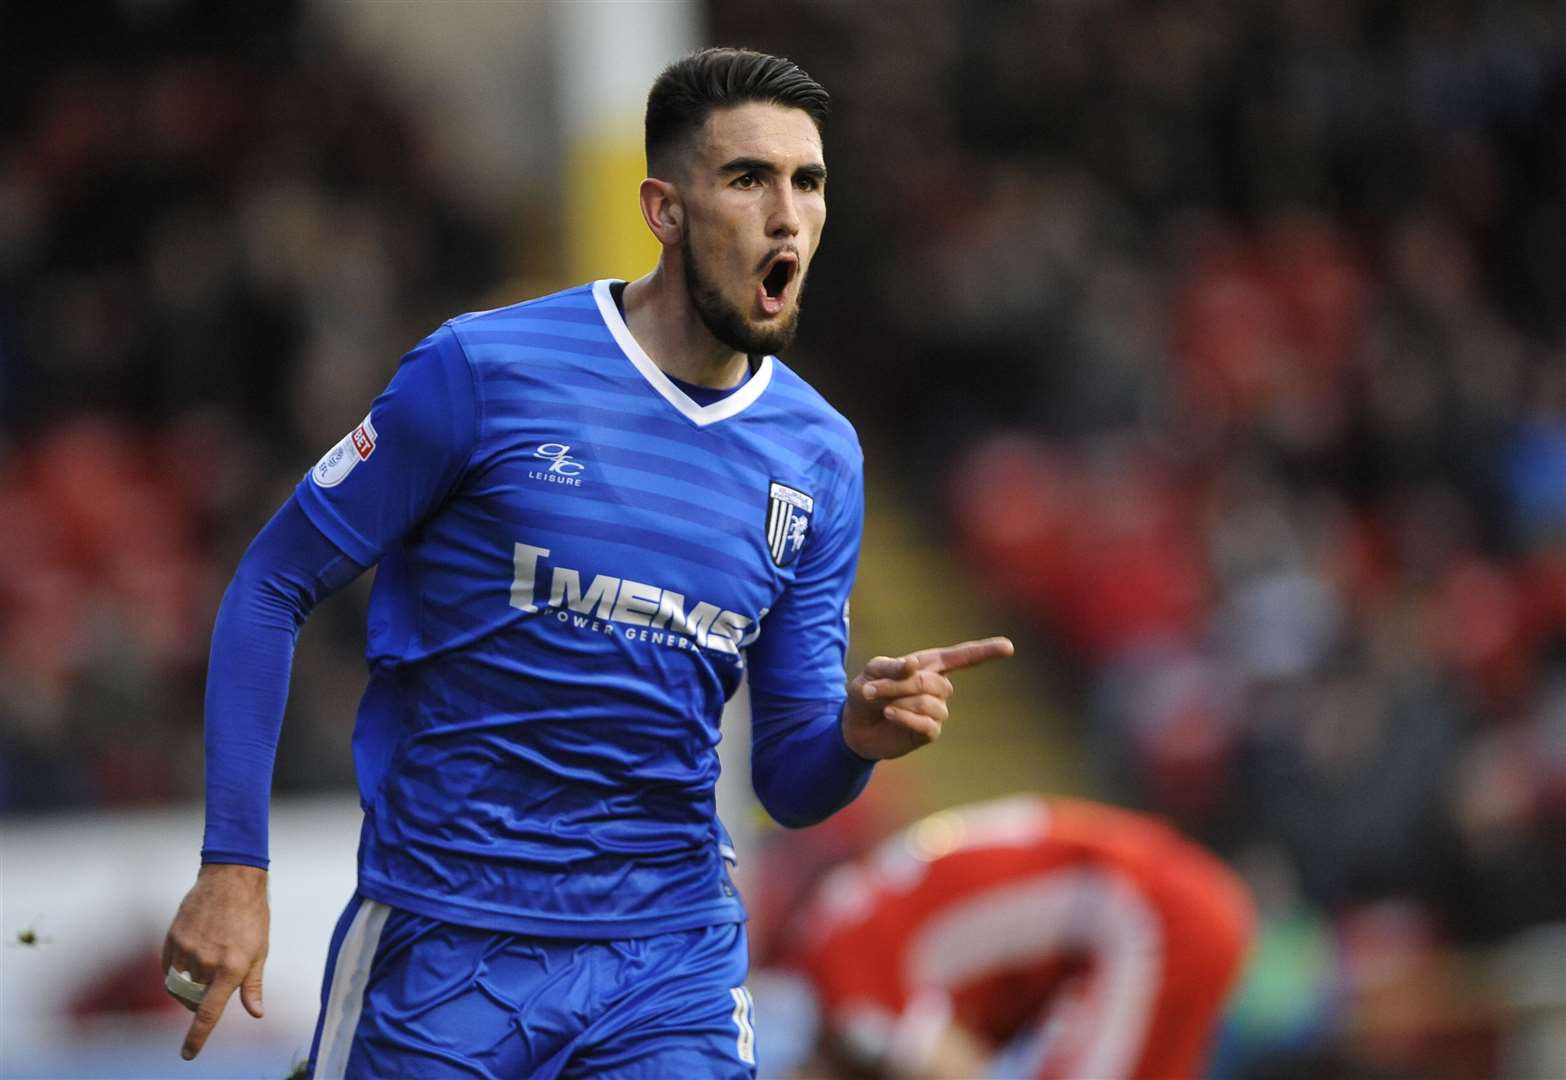 Gillingham’s Conor Wilkinson celebrates scoring against Walsall